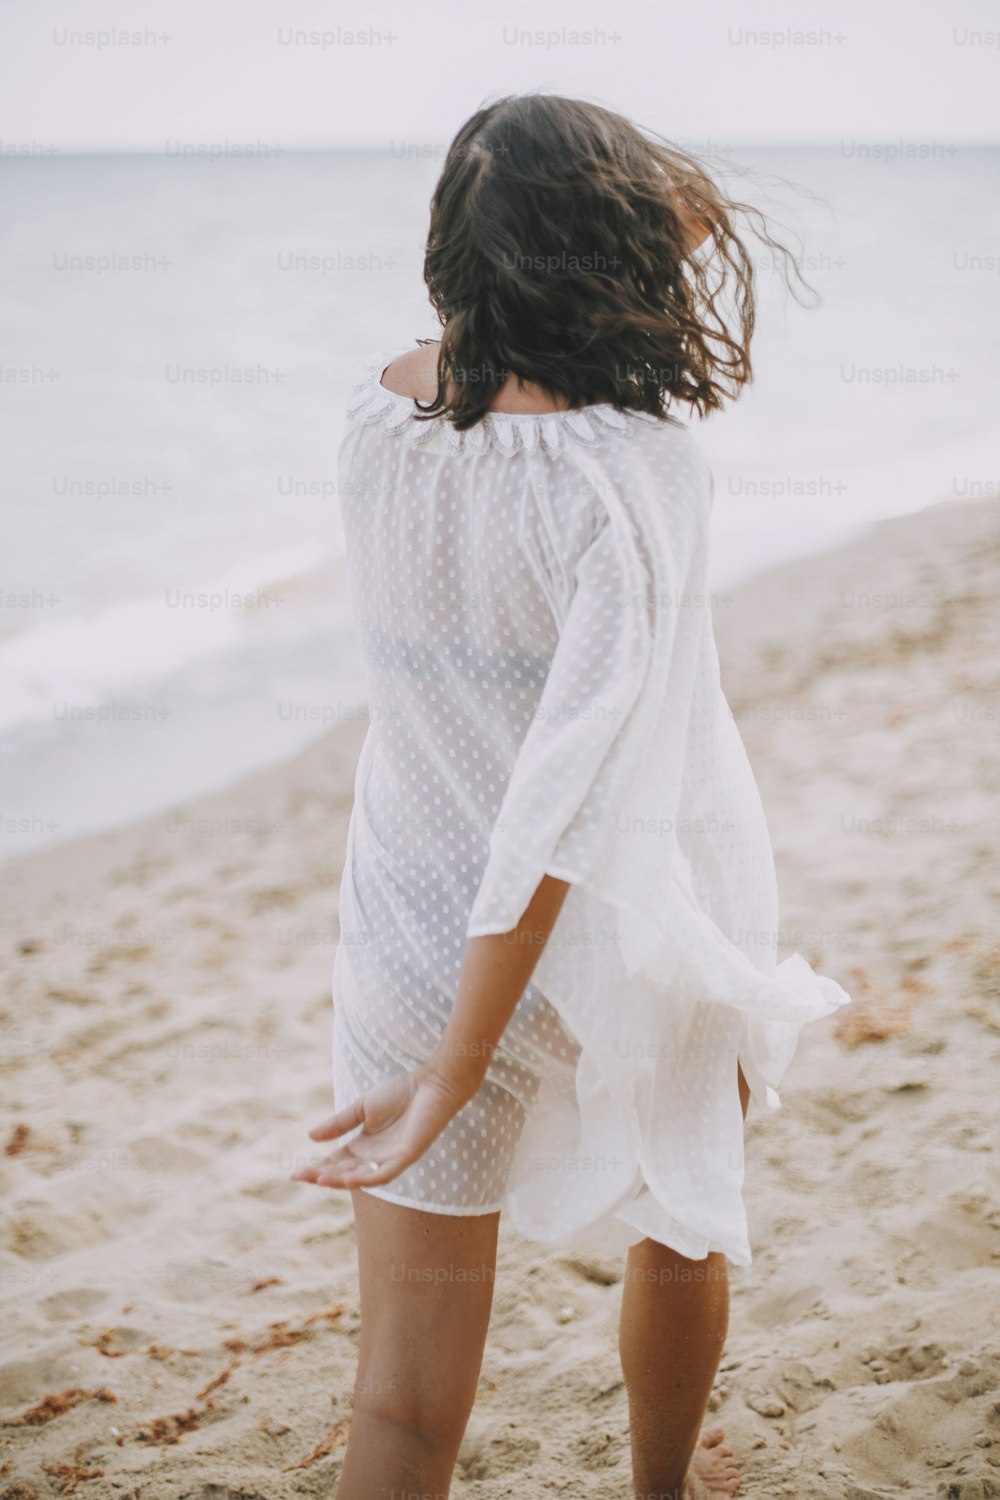 Carefree boho girl in white summer dress walking on beach. Happy young woman relaxing on seashore. Summer vacation. Mindfulness and relaxation. Lifestyle